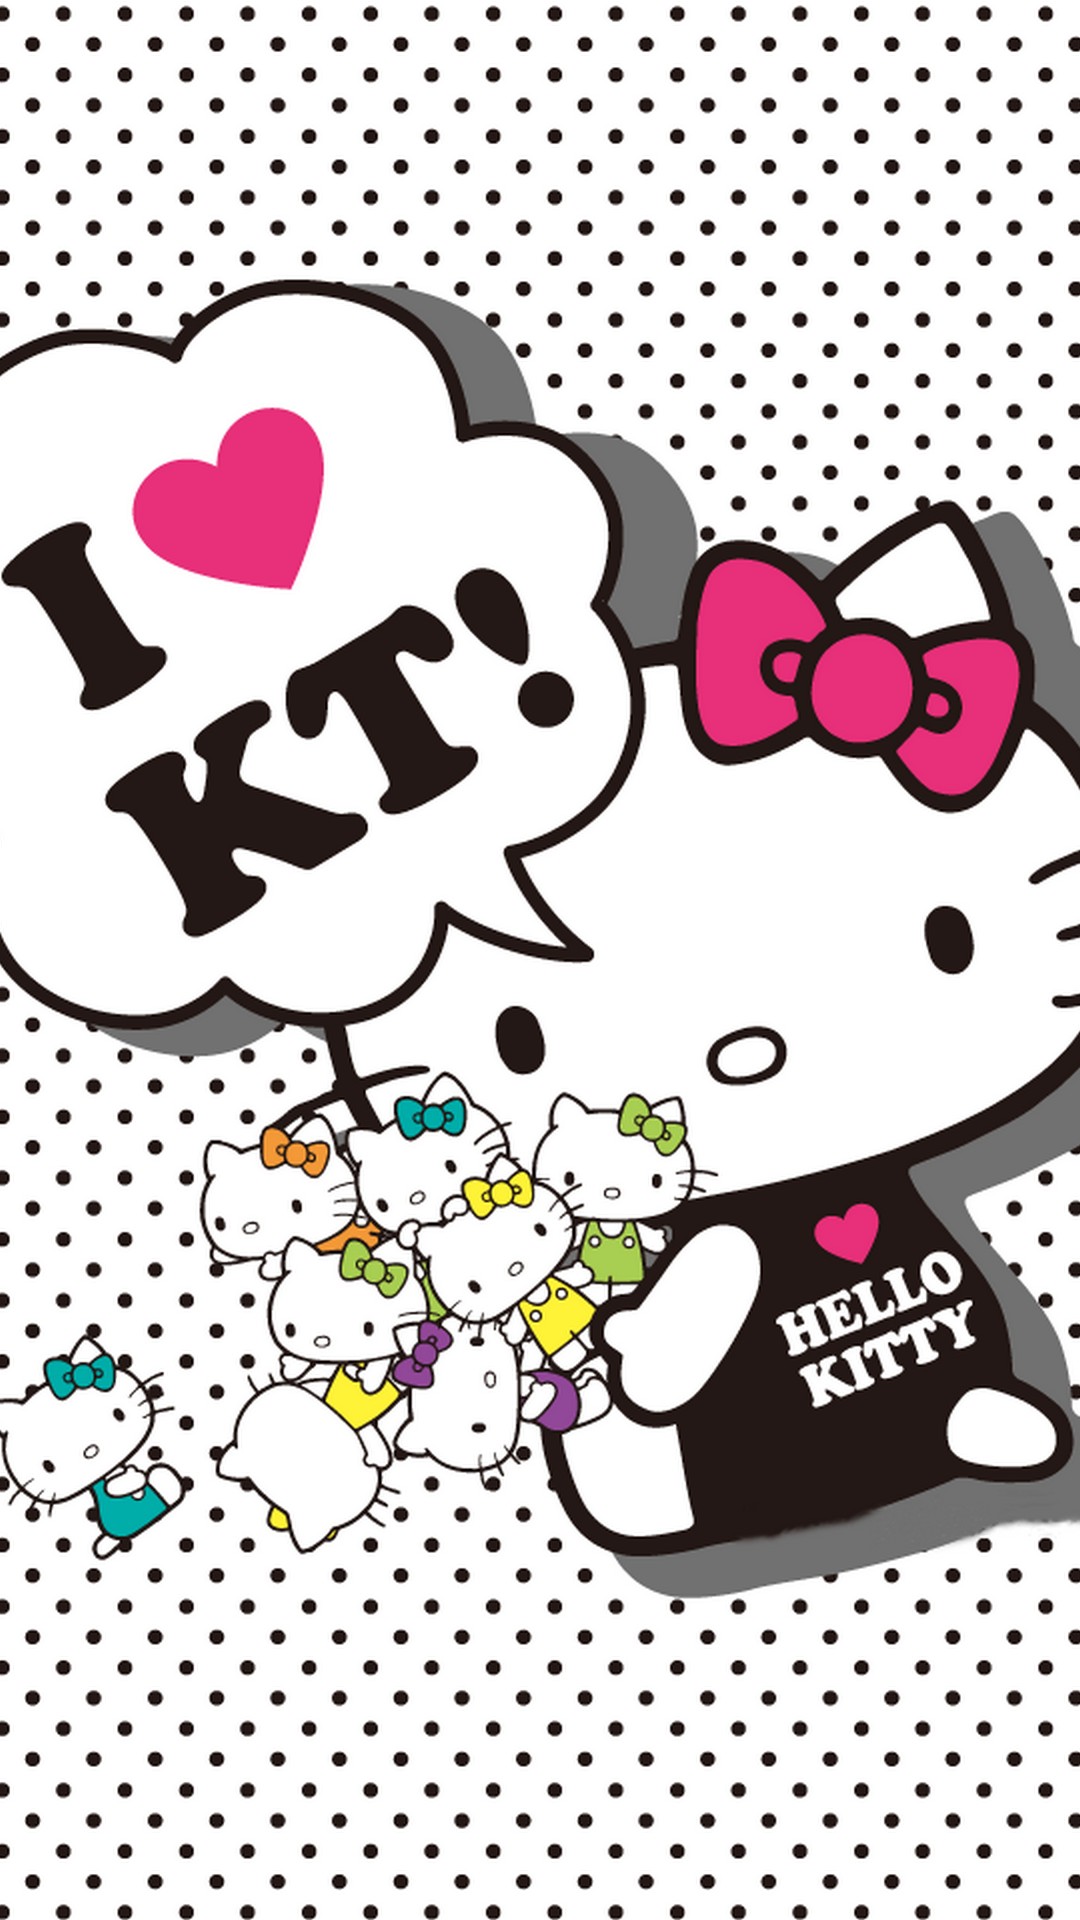 Hello Kitty HD Wallpapers For Mobile with image resolution 1080x1920 pixel. You can make this wallpaper for your Desktop Computer Backgrounds, Mac Wallpapers, Android Lock screen or iPhone Screensavers